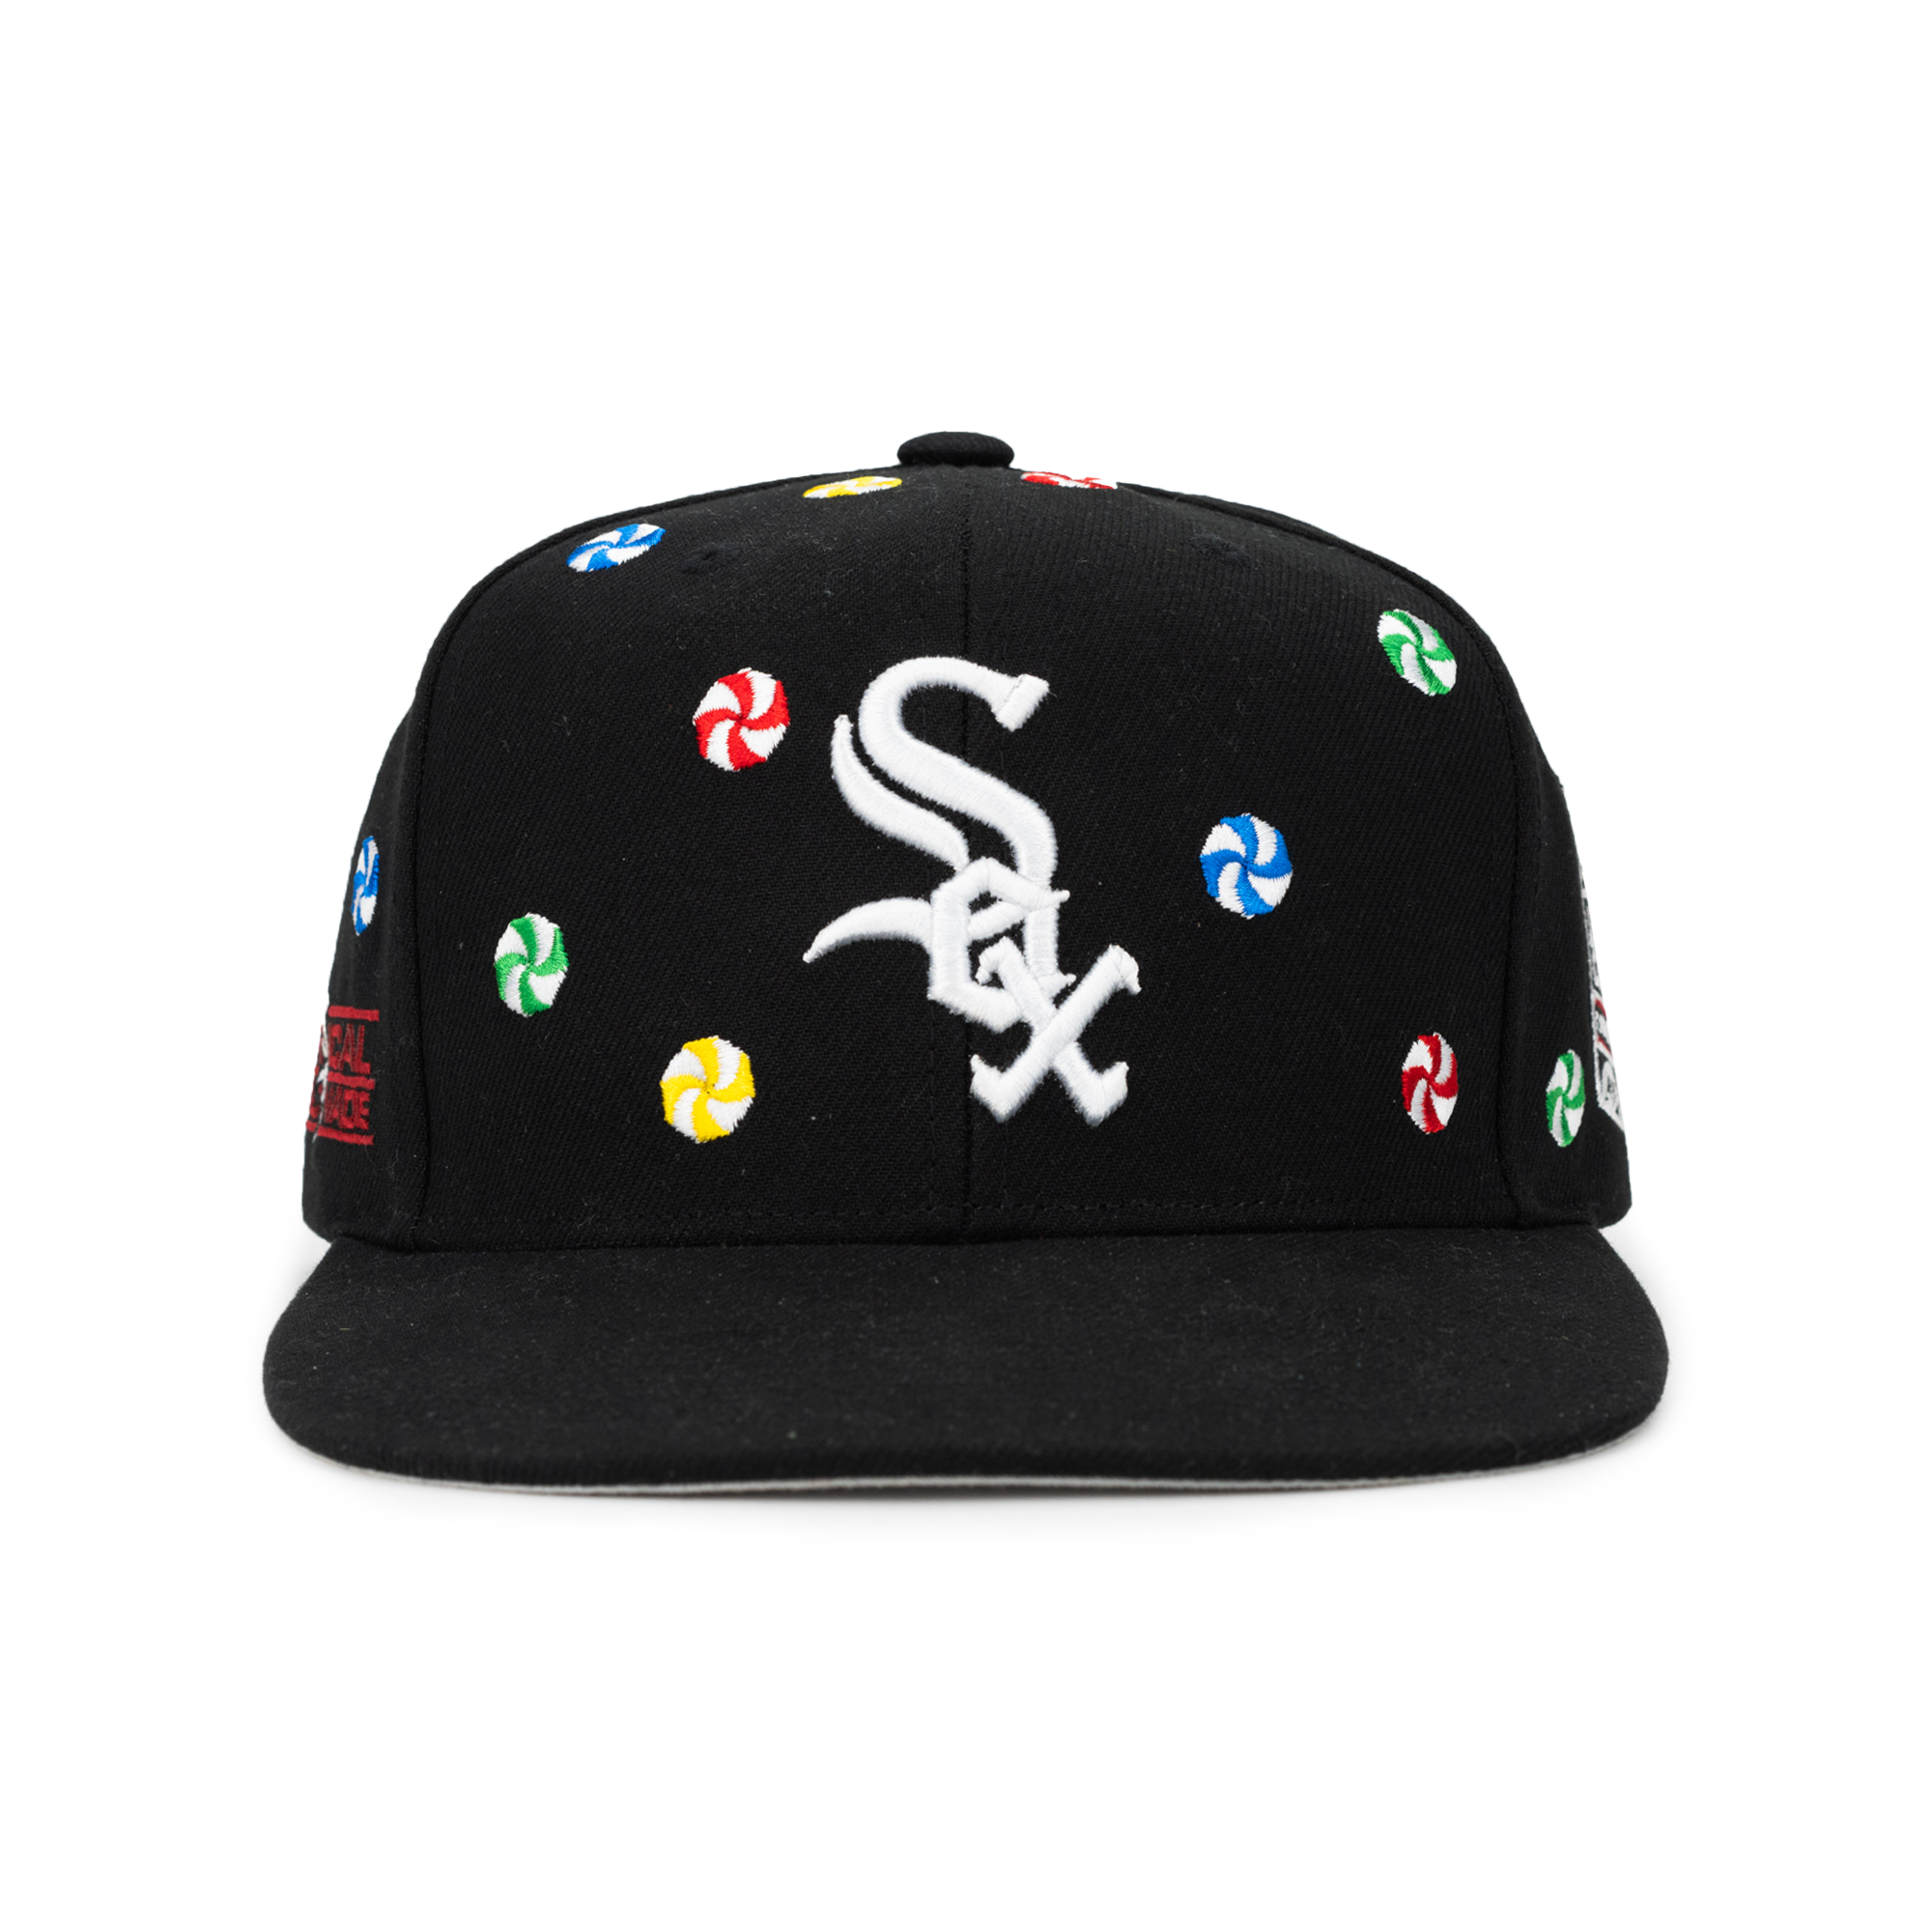 LL x White Sox Snapback front.png